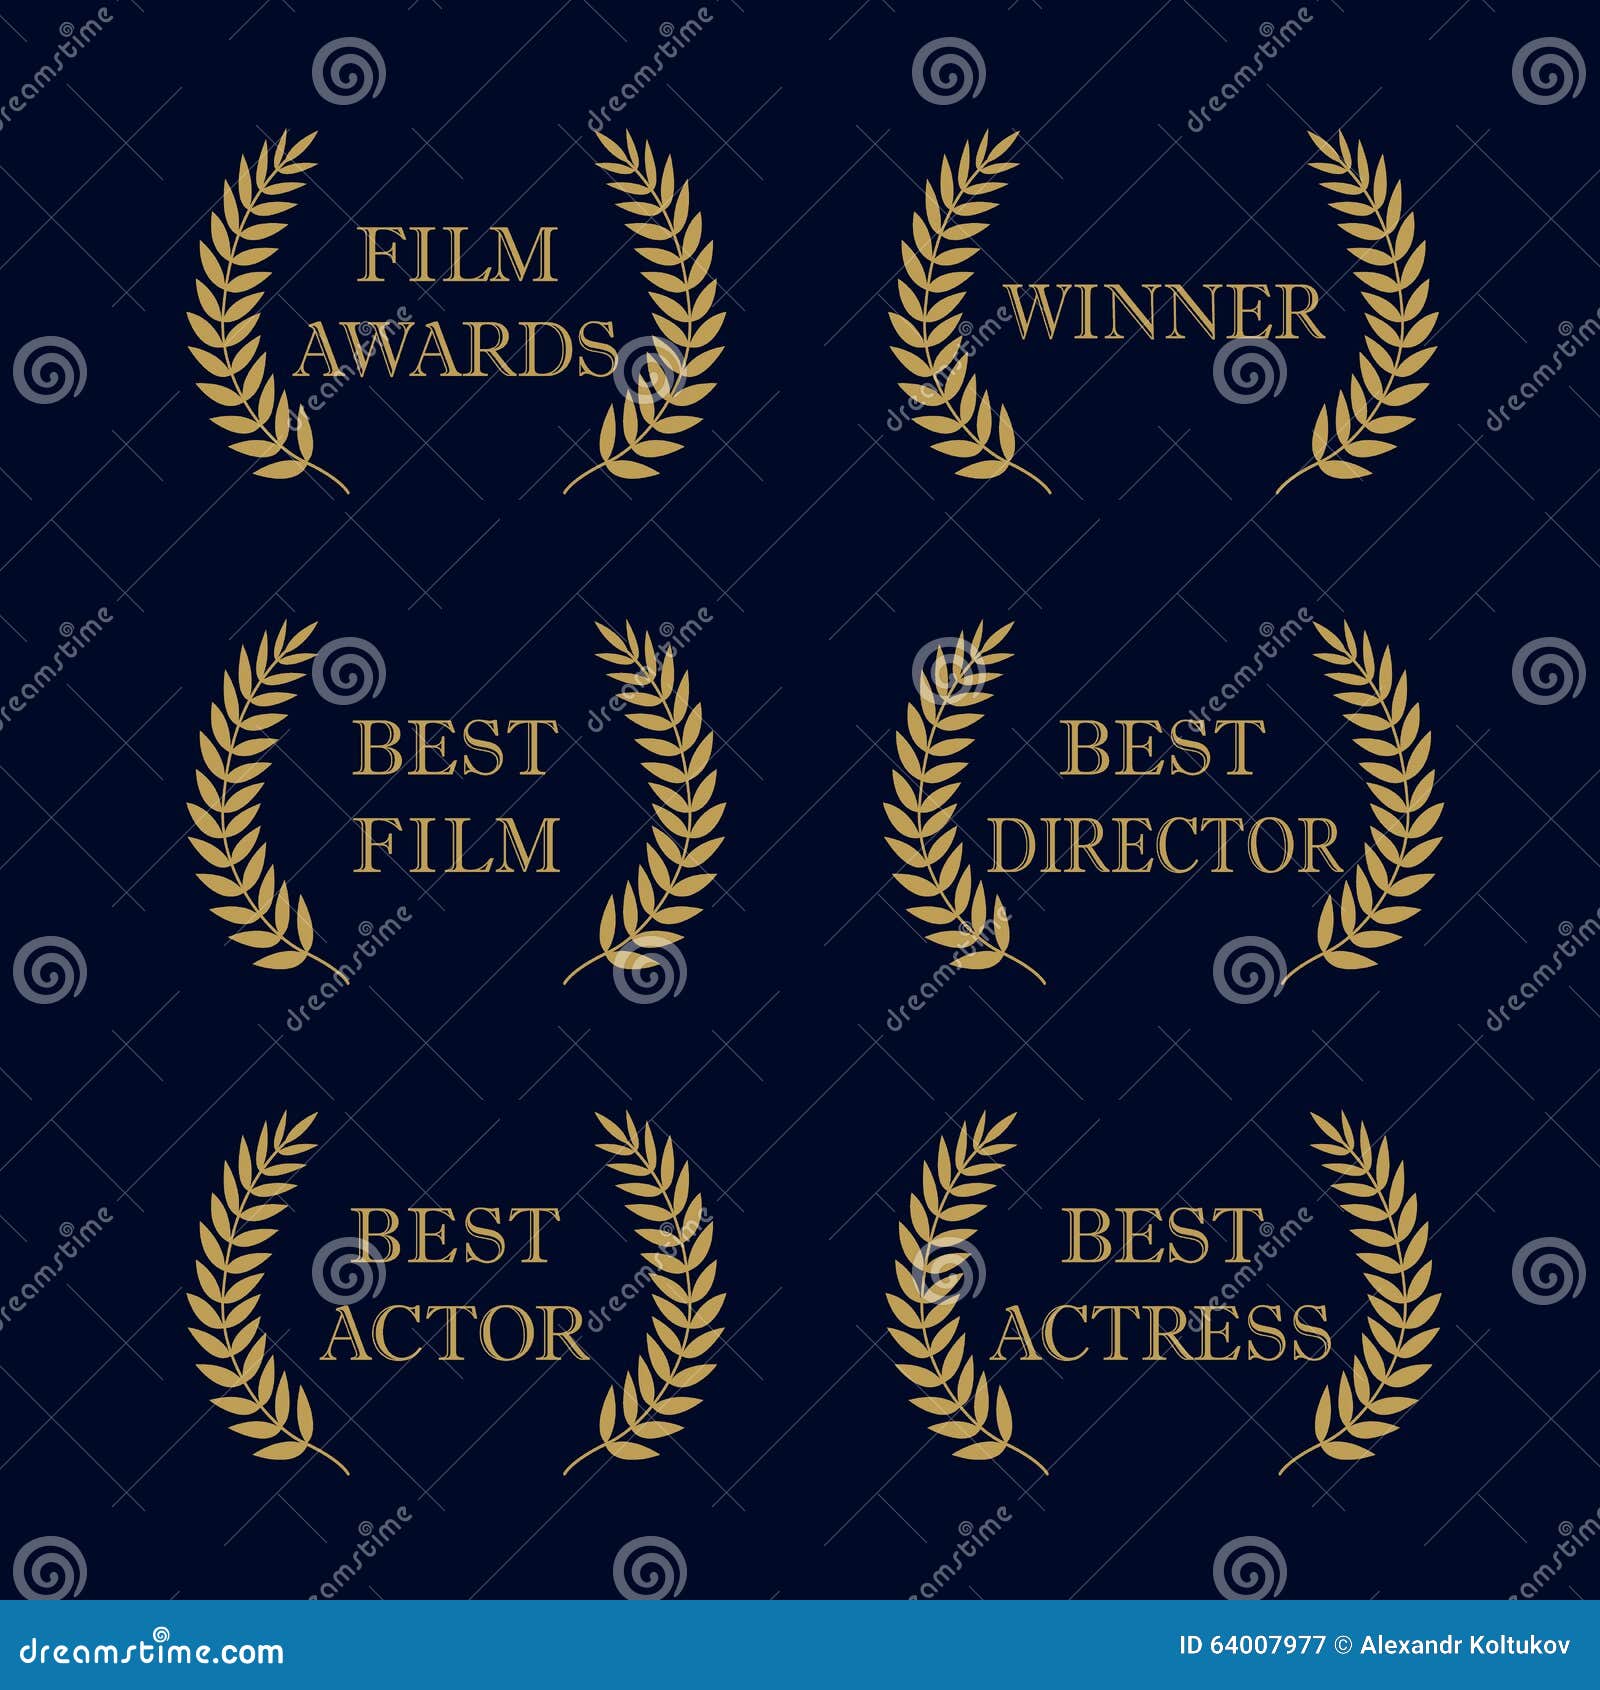 And for Nominees) of Movies Award Star (List Awards Winners 2021